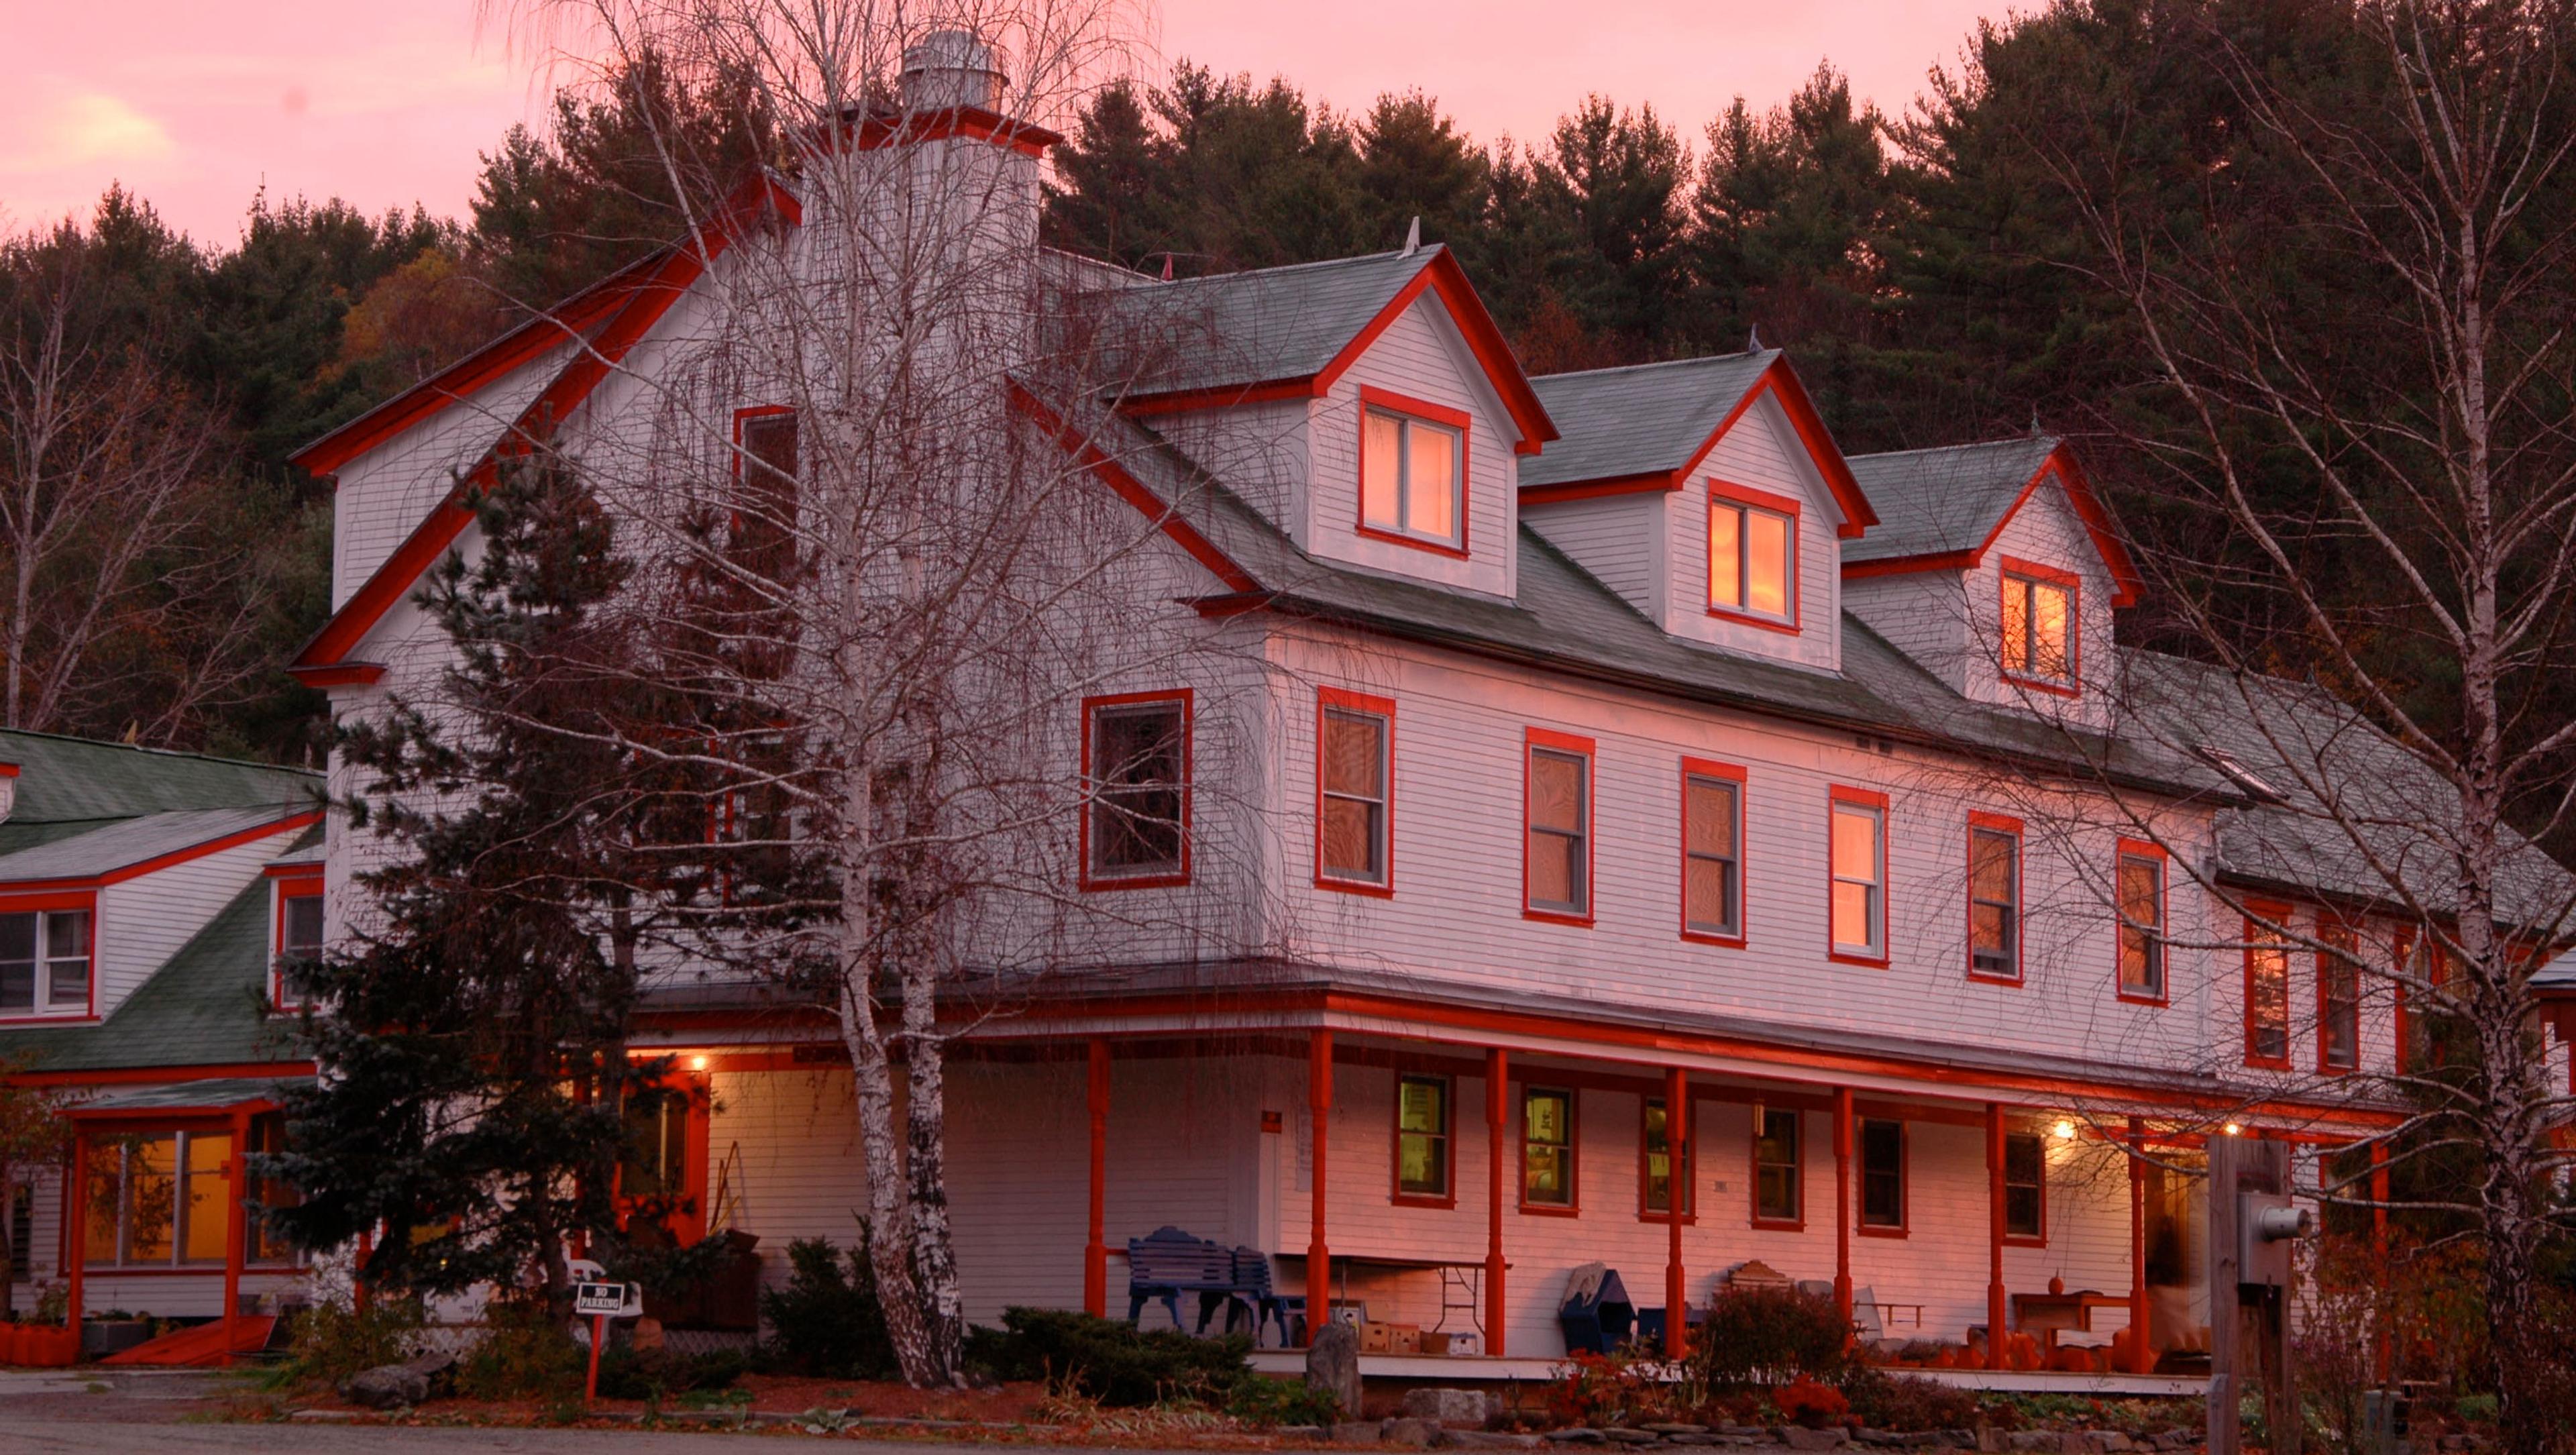 Accommodations at Karme Choling Meditation Retreat Center, Vermont